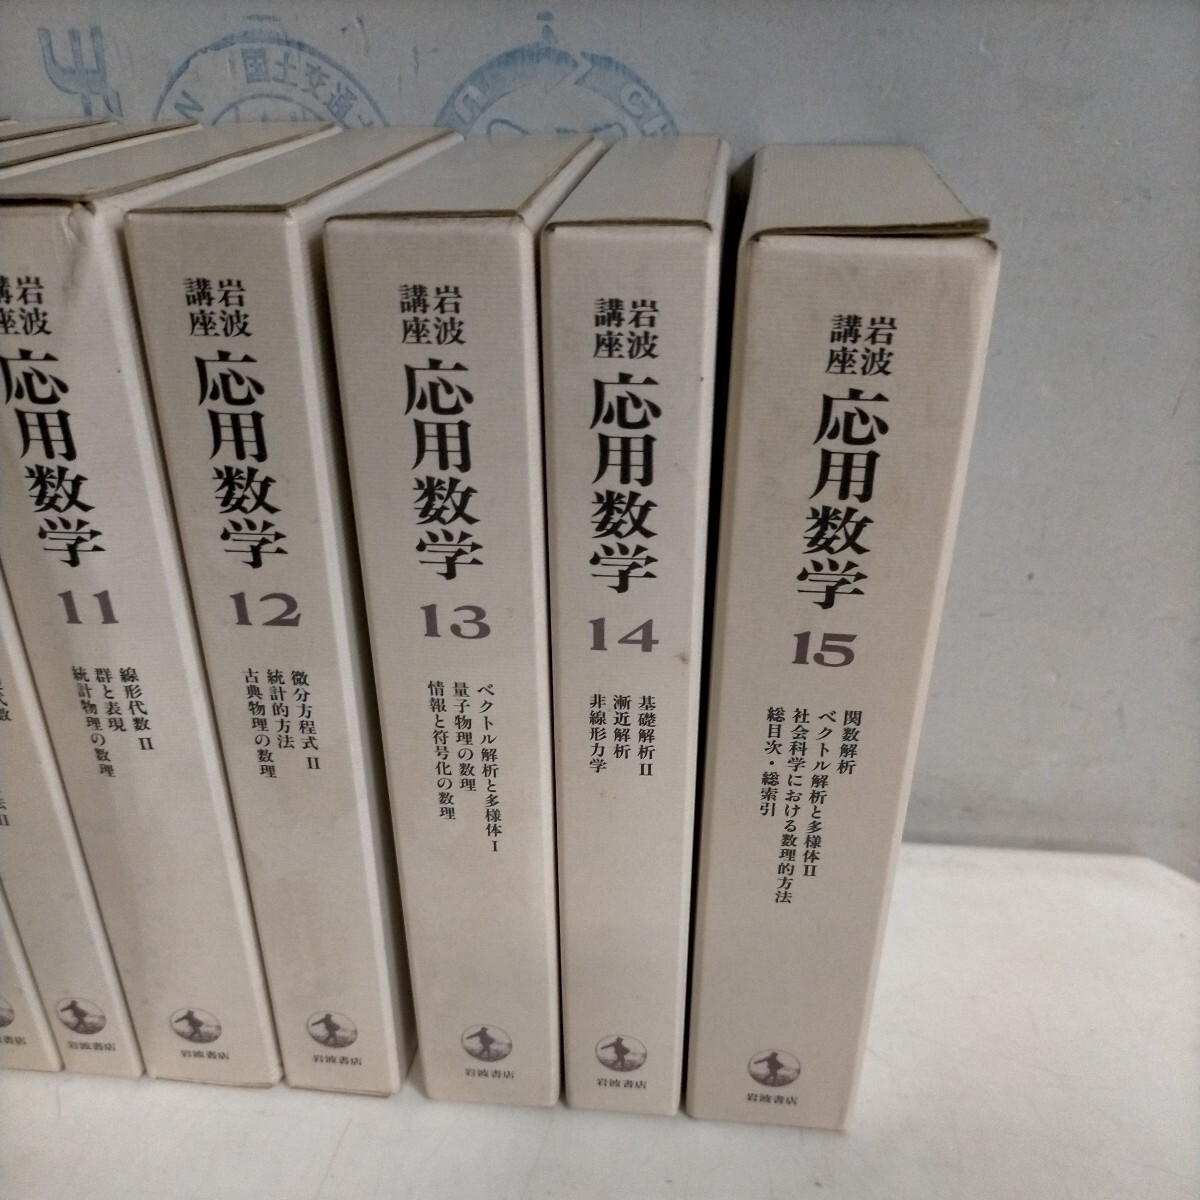  Iwanami course respondent for mathematics all 15 volume . line shape fee number / fee number ../ theory .. count /. element . number theory / the smallest minute person degree type ^ secondhand book / not yet inspection goods not yet cleaning / no claim .